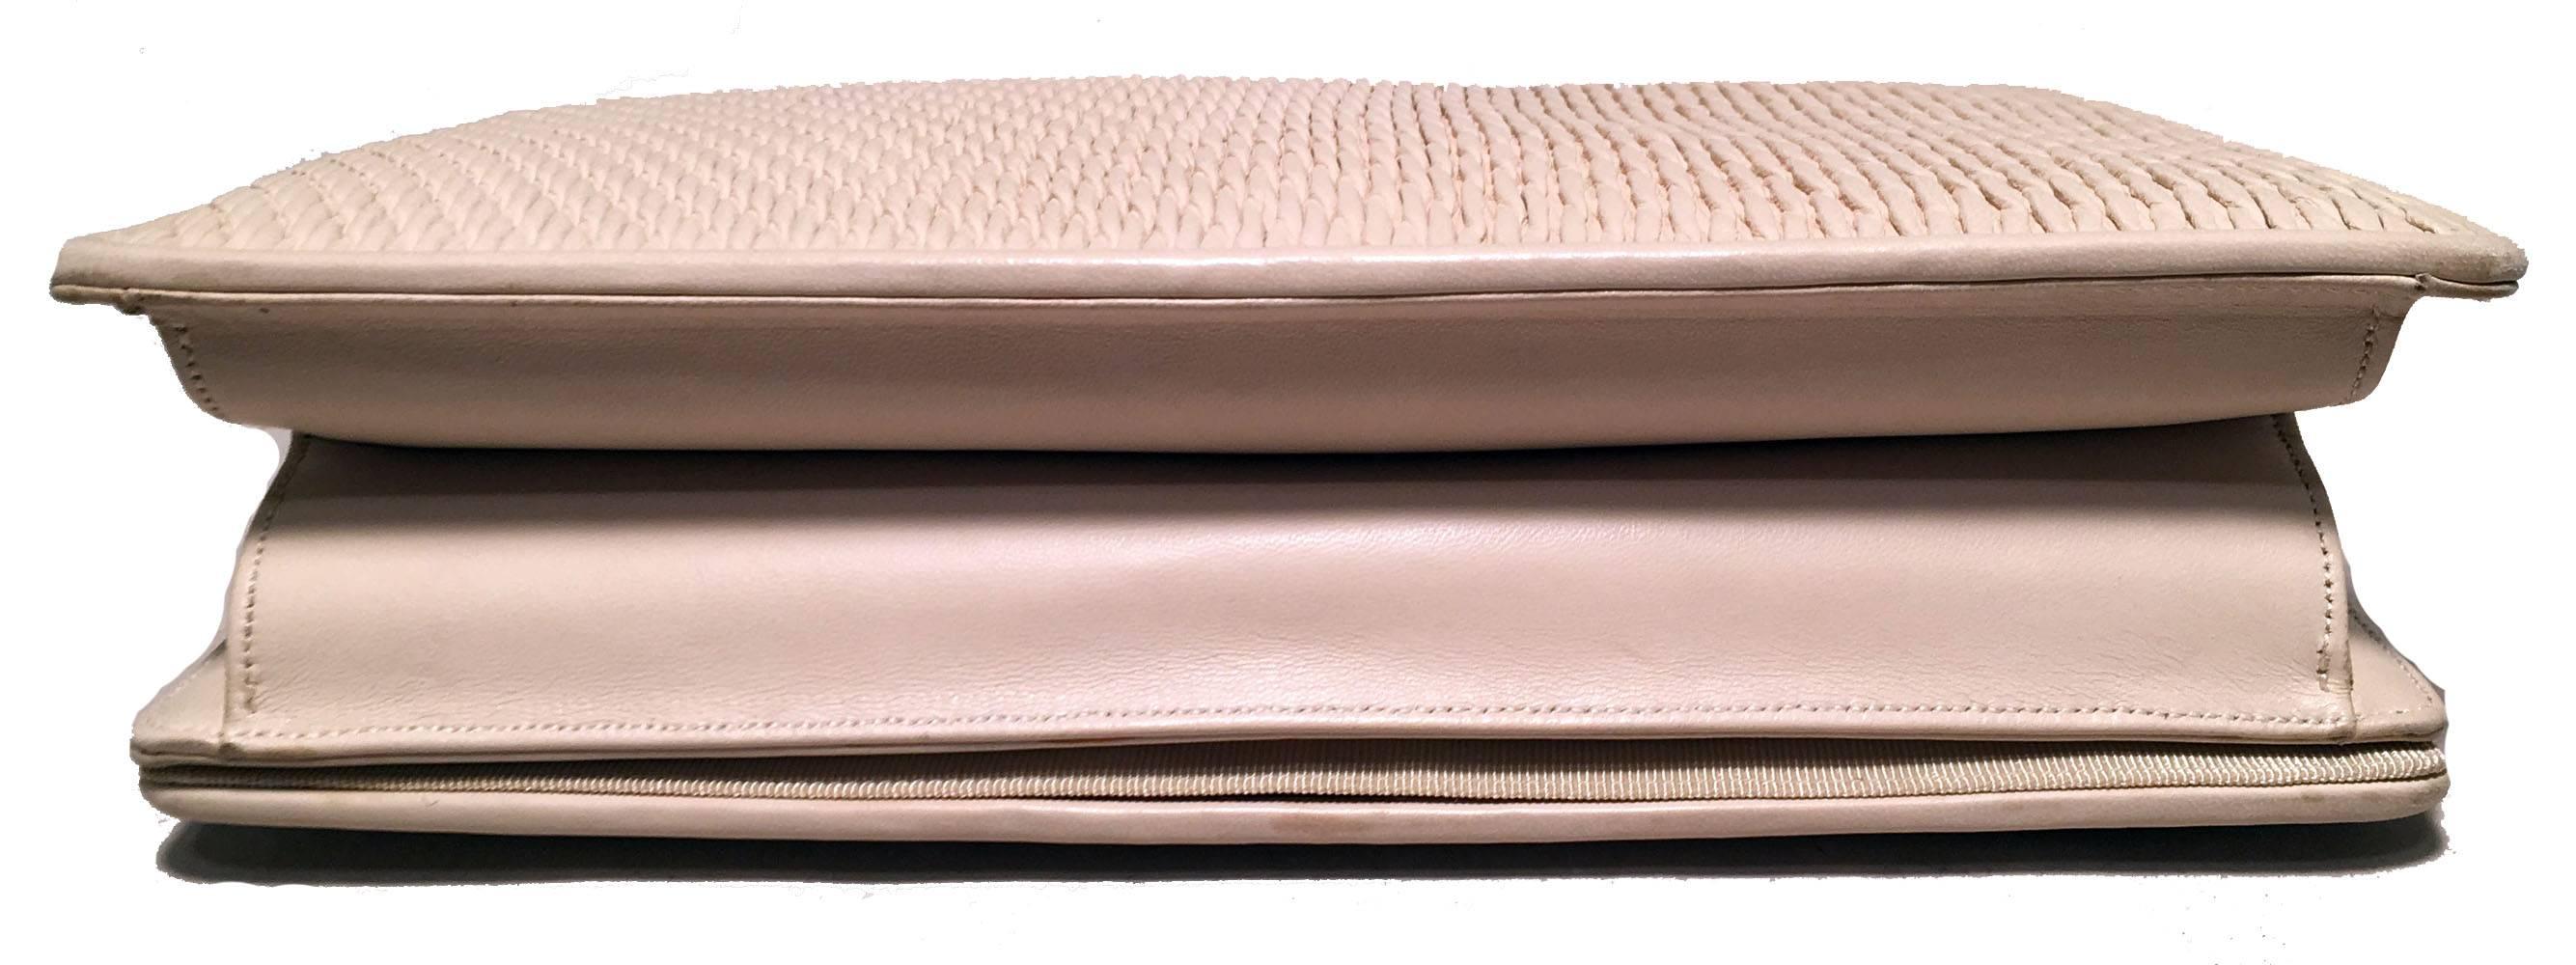 Judith Leiber Vintage Cream Leather Clutch In Excellent Condition For Sale In Philadelphia, PA